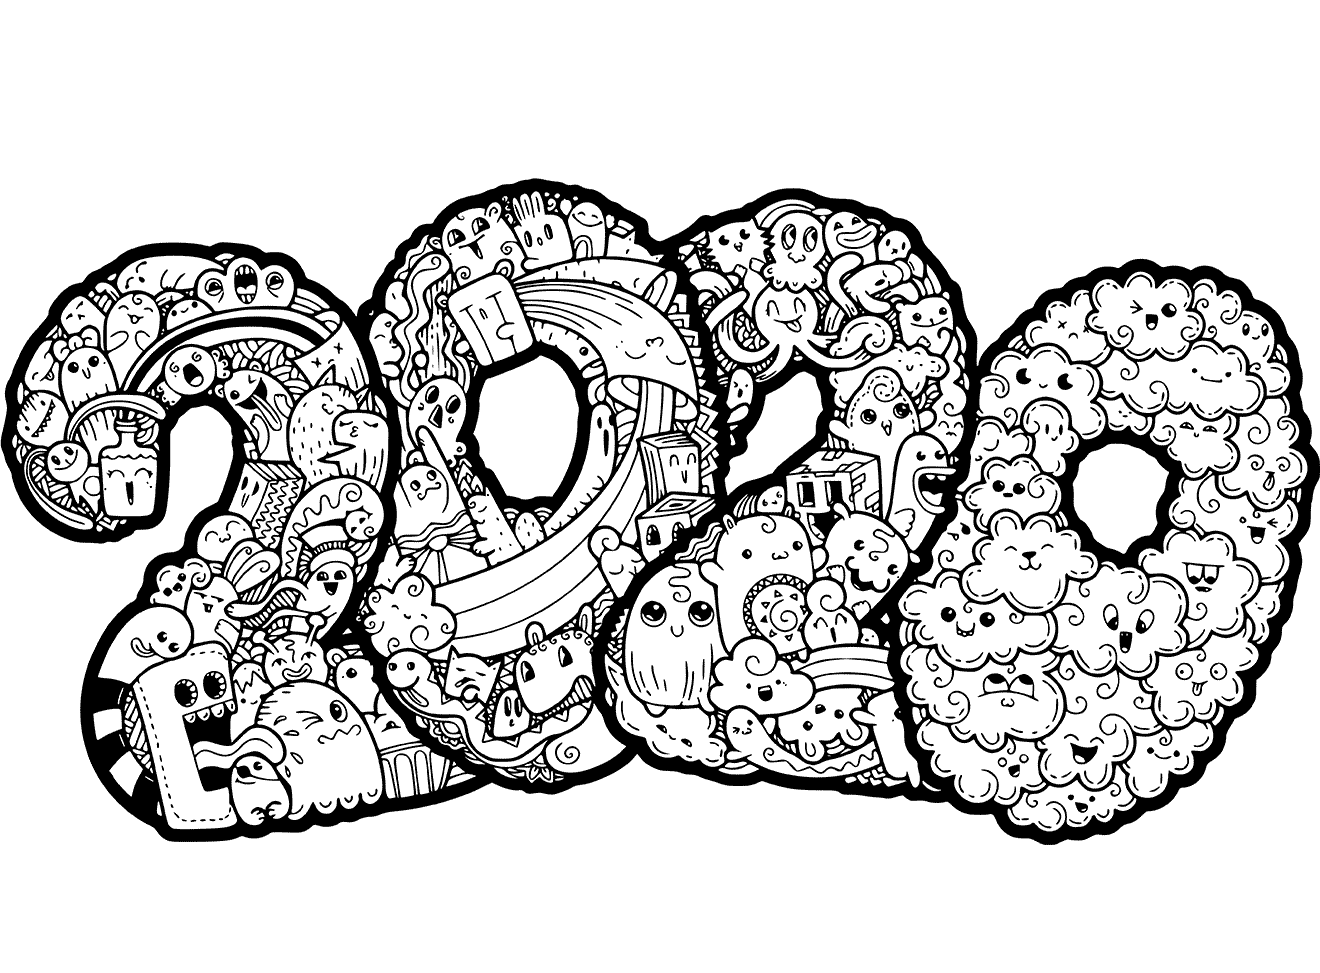 New Year 2020 Doodle Coloring Page